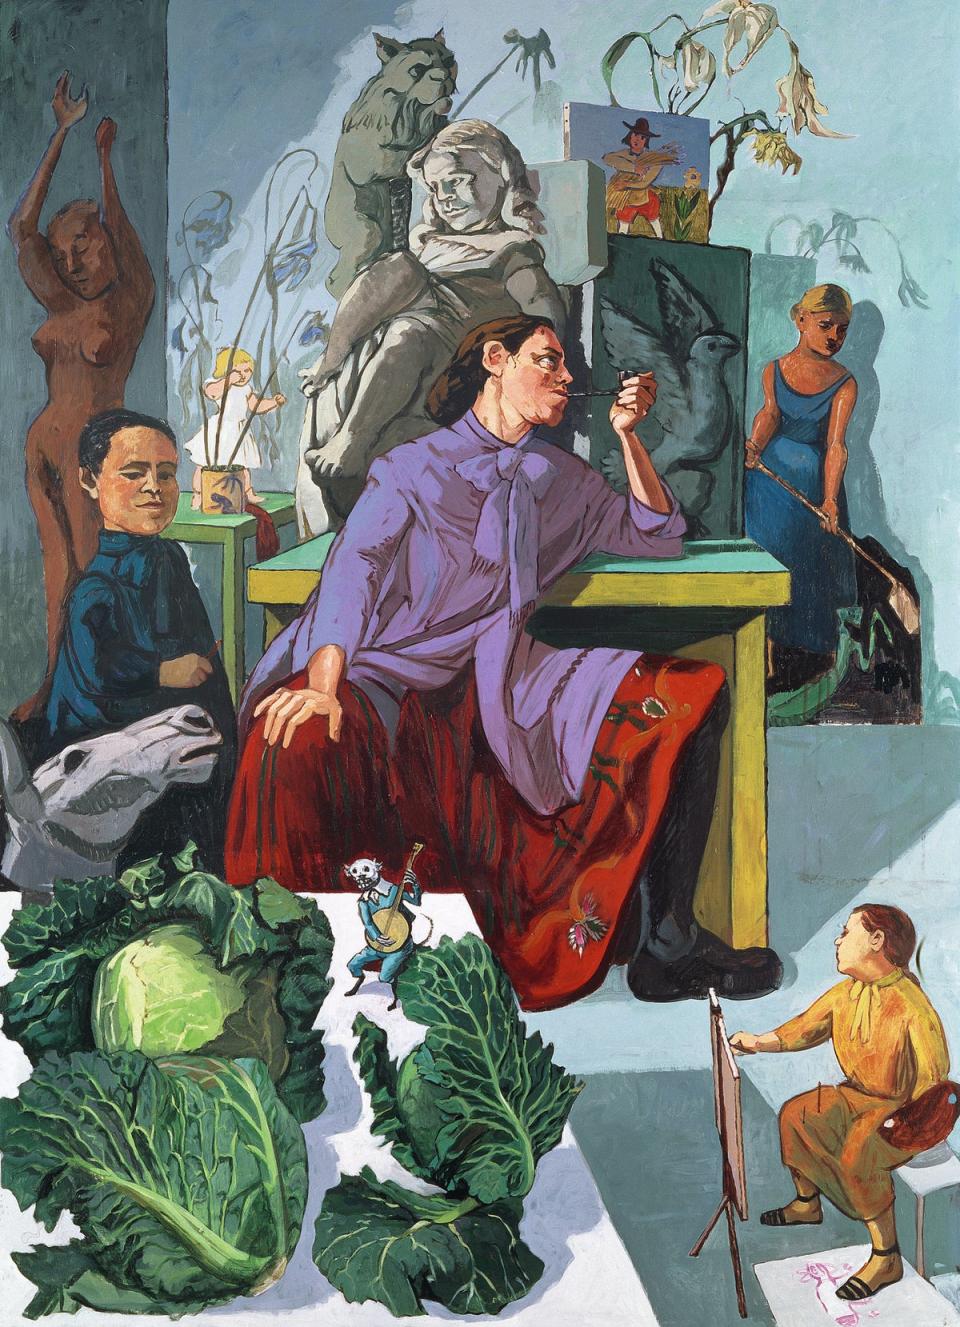 ‘The Artist in Her Studio’ by Paula Rego (Museo Picasso Málaga)